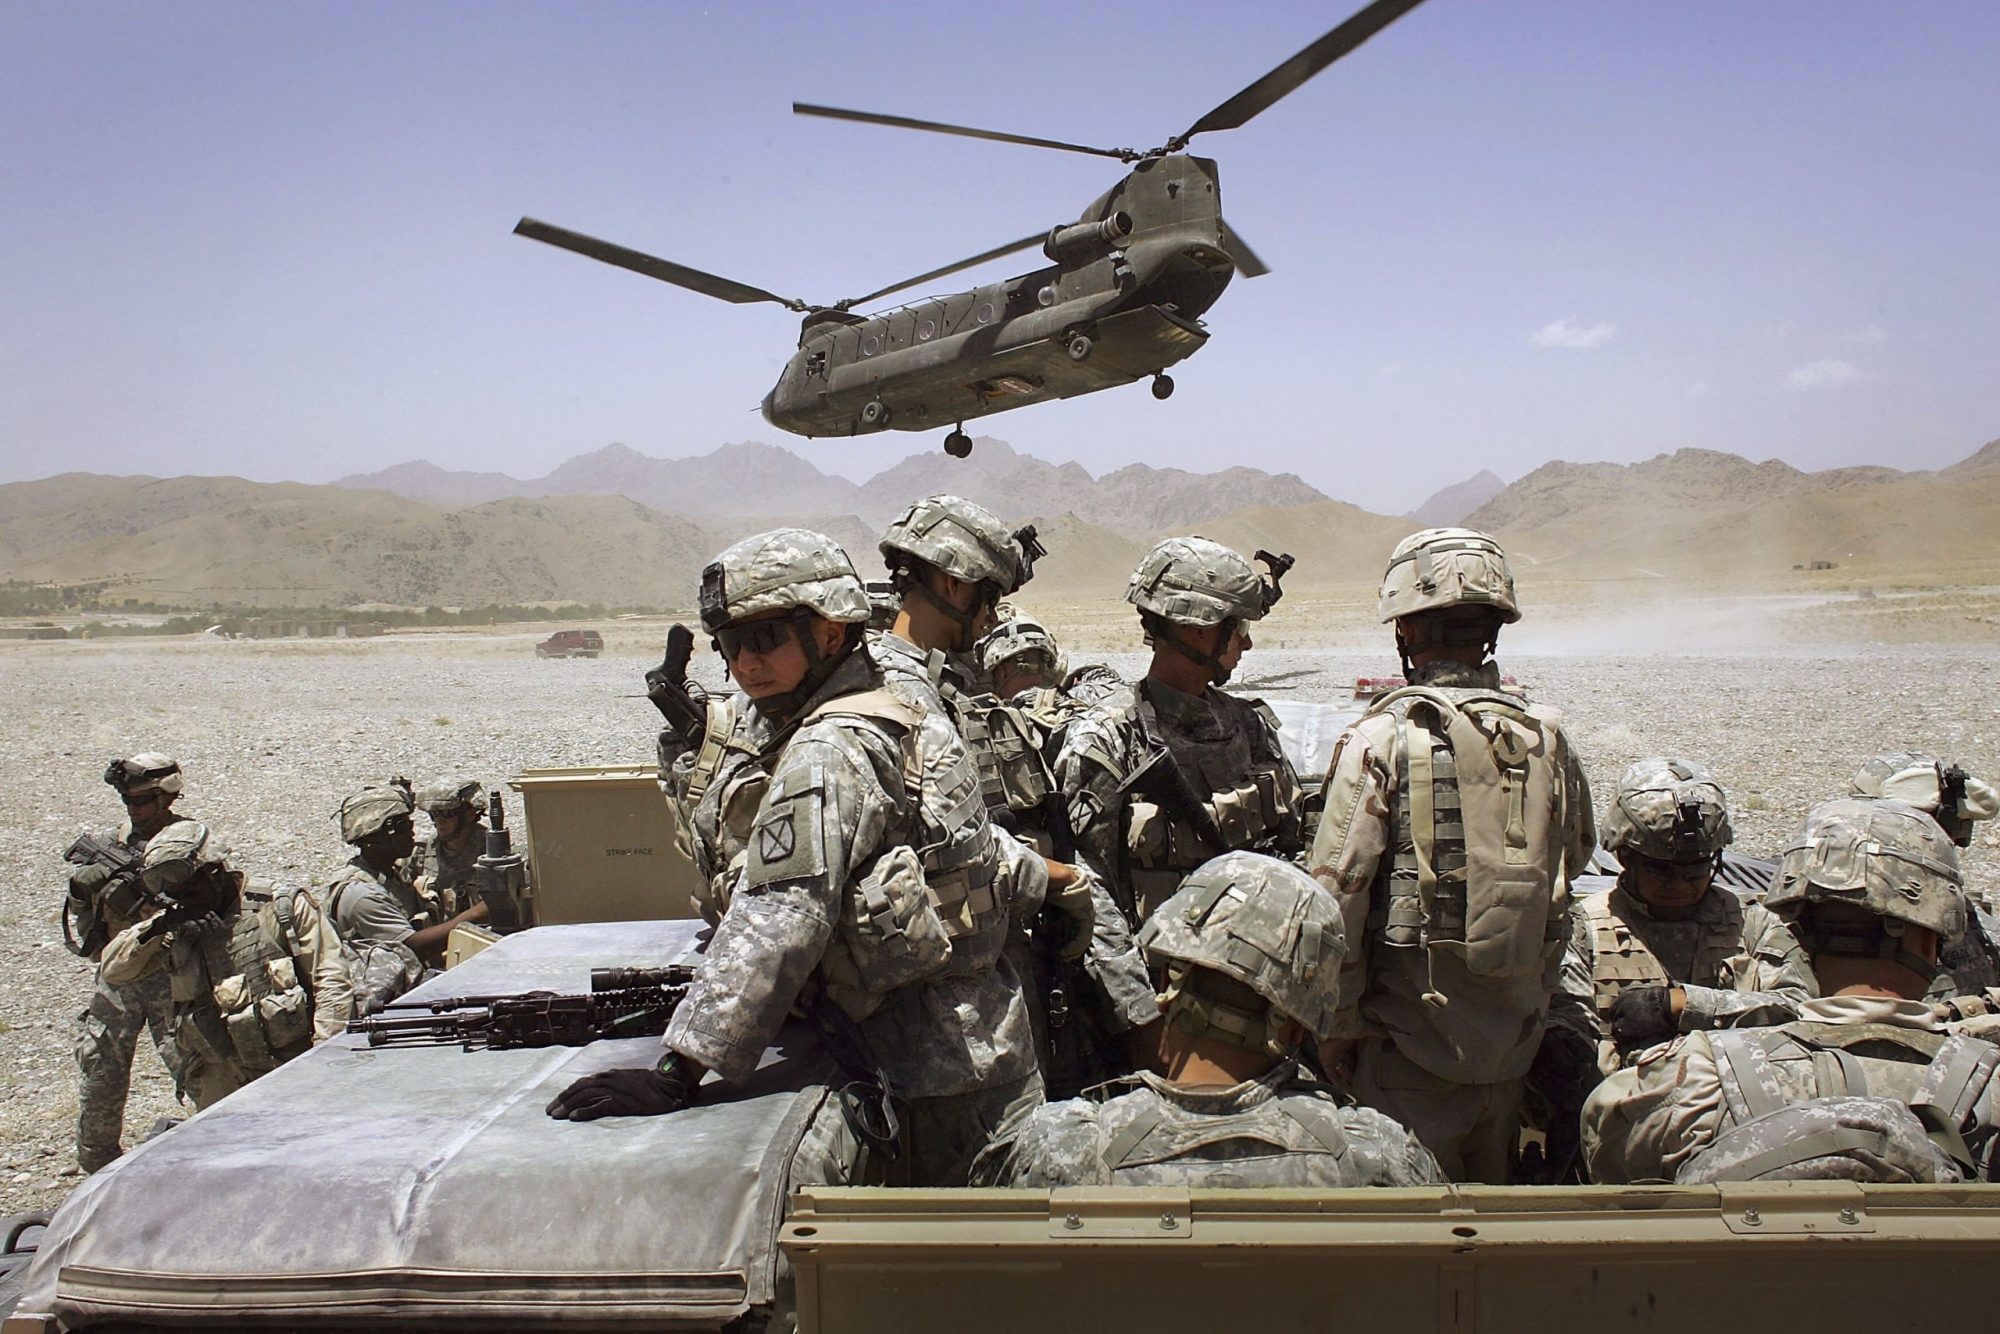 American soldiers from the 10th Mountain Division deploy to fight Taliban fighters as part of Operation Mountain Thrust to a U.S. base near the village of Deh Afghan on June 22, 2006 in the Zabul province of Afghanistan. Photo by John Moore/Getty Images